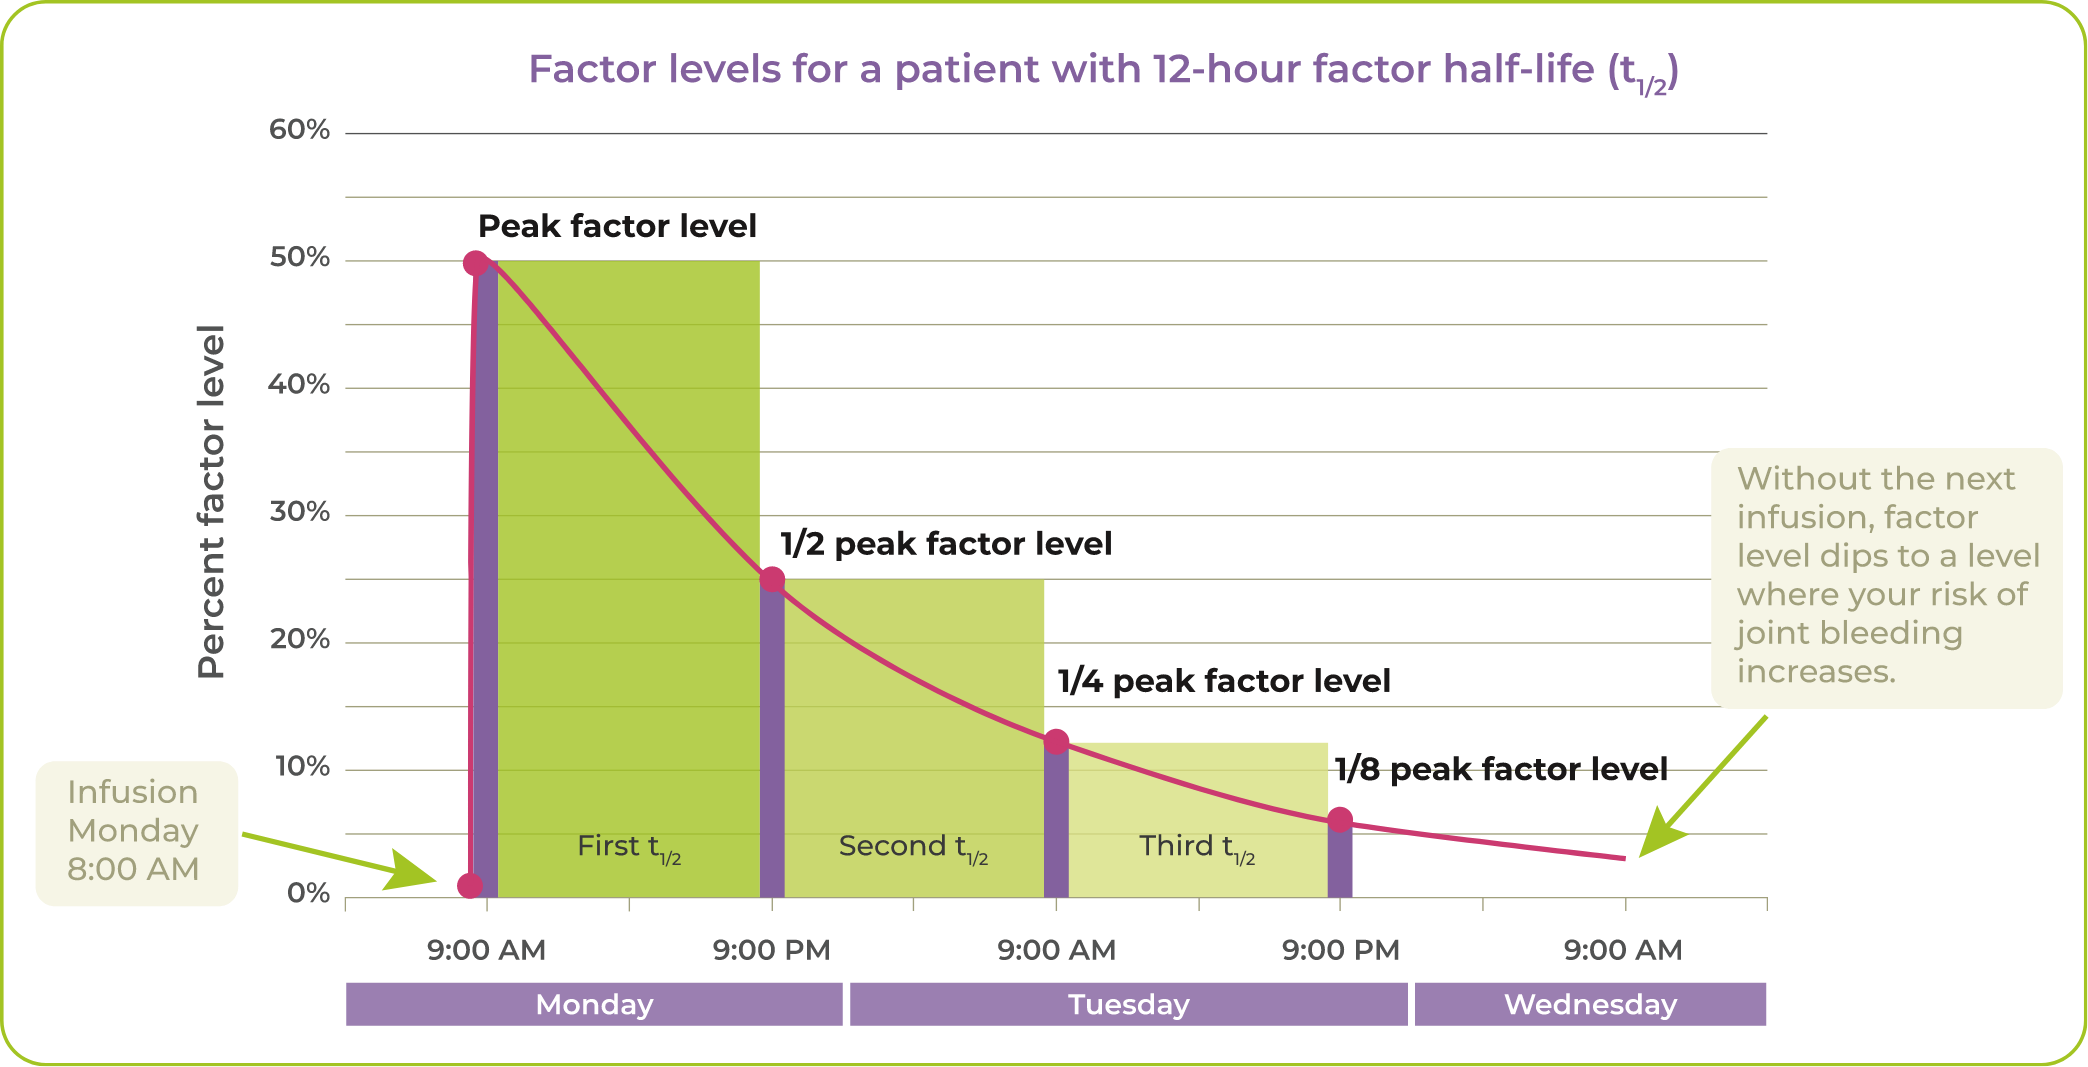 Factor levels for a patient with 12-hour factor half-life